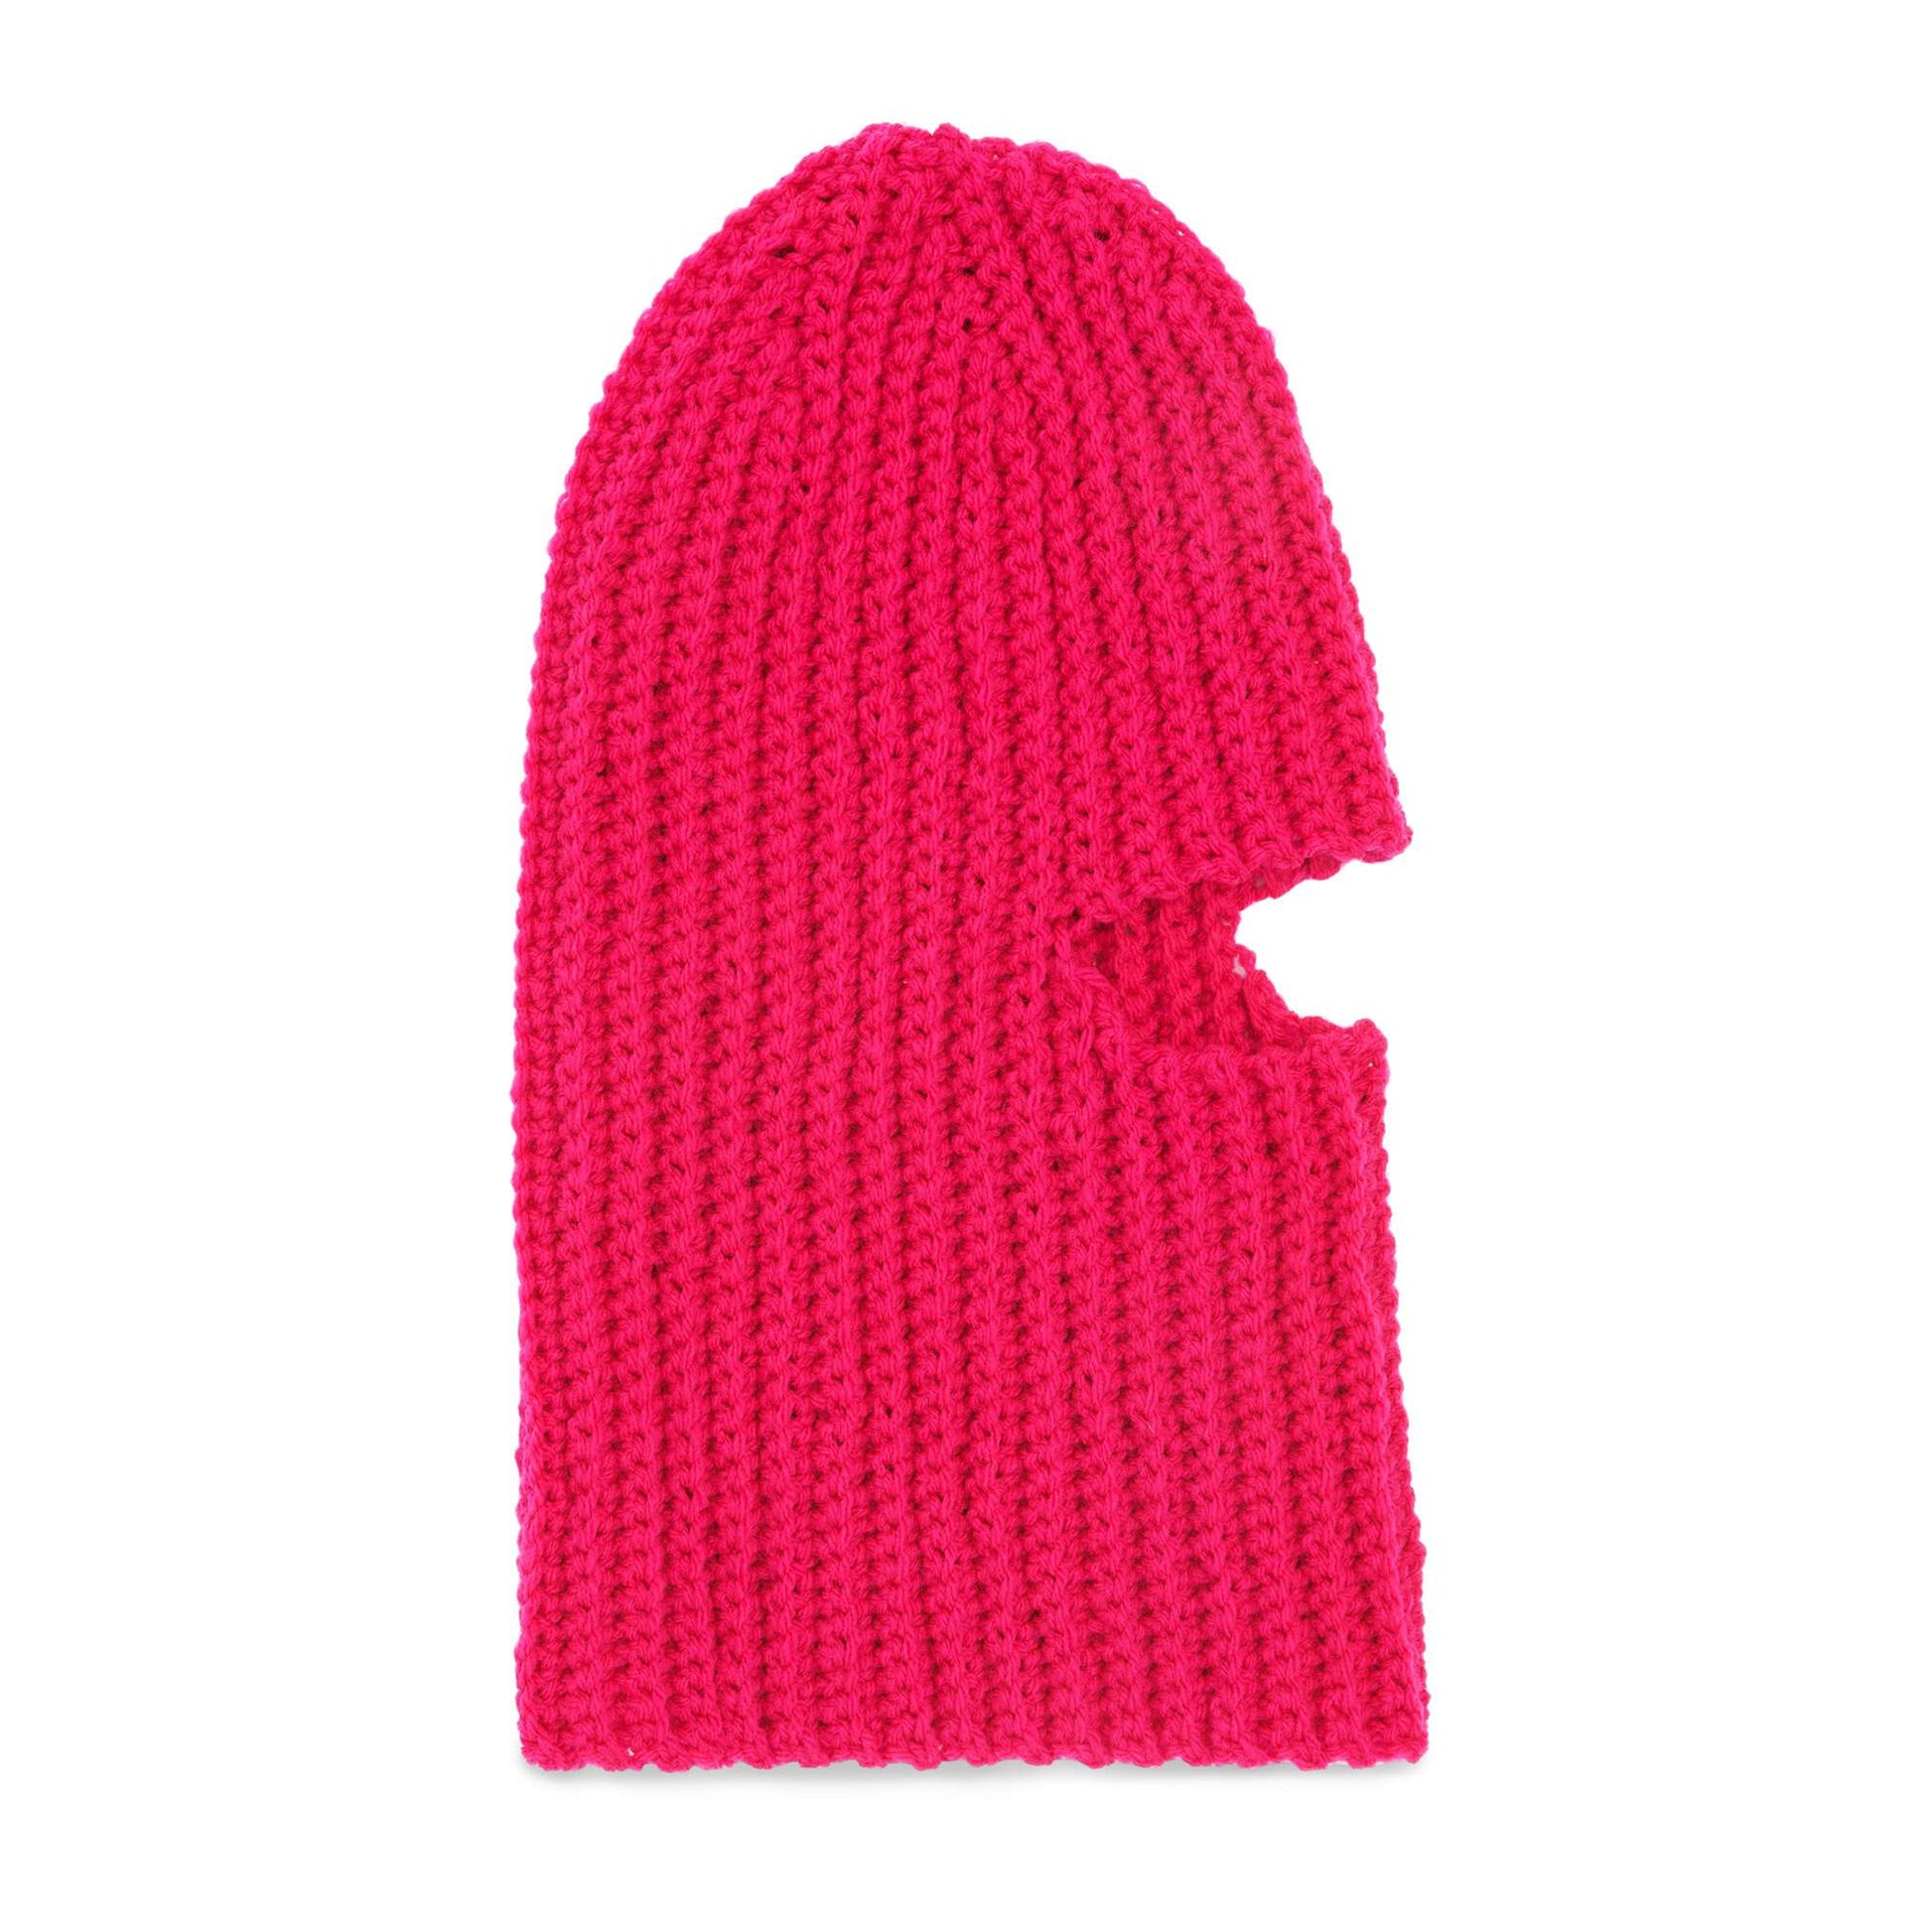 Free Red Heart Crochet Ribbed Balaclava For Adults Pattern